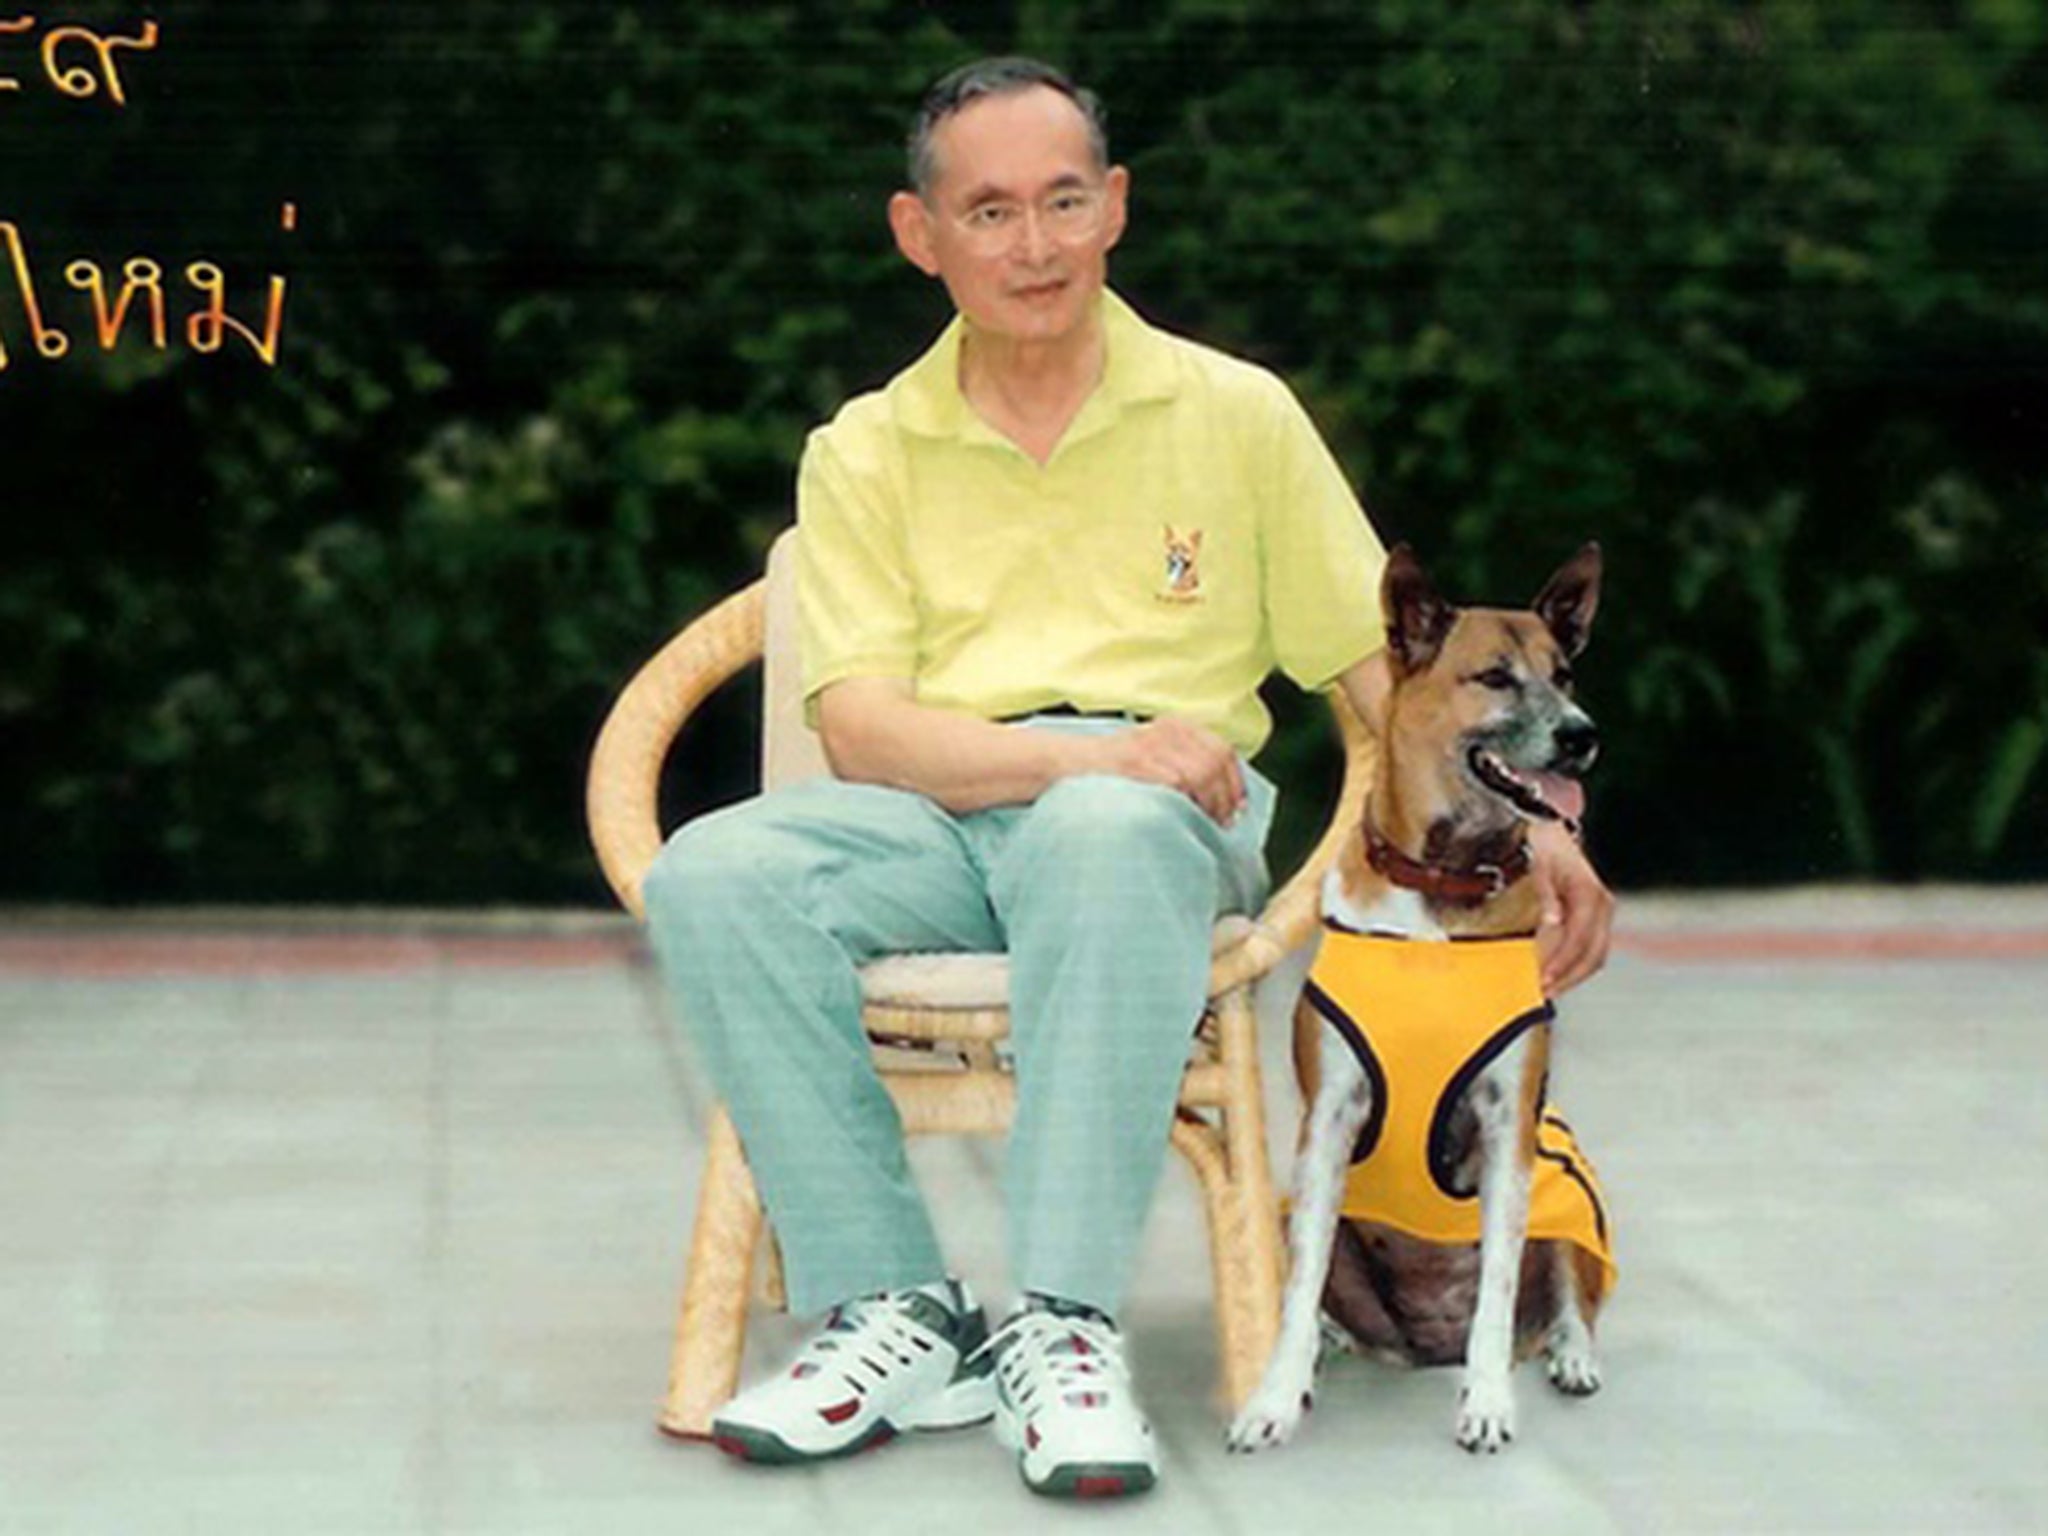 Tongdaeng the dog became a household name in Thailand after King Bhumiboil Adulyadei penned a heartfelt book about her in 2002